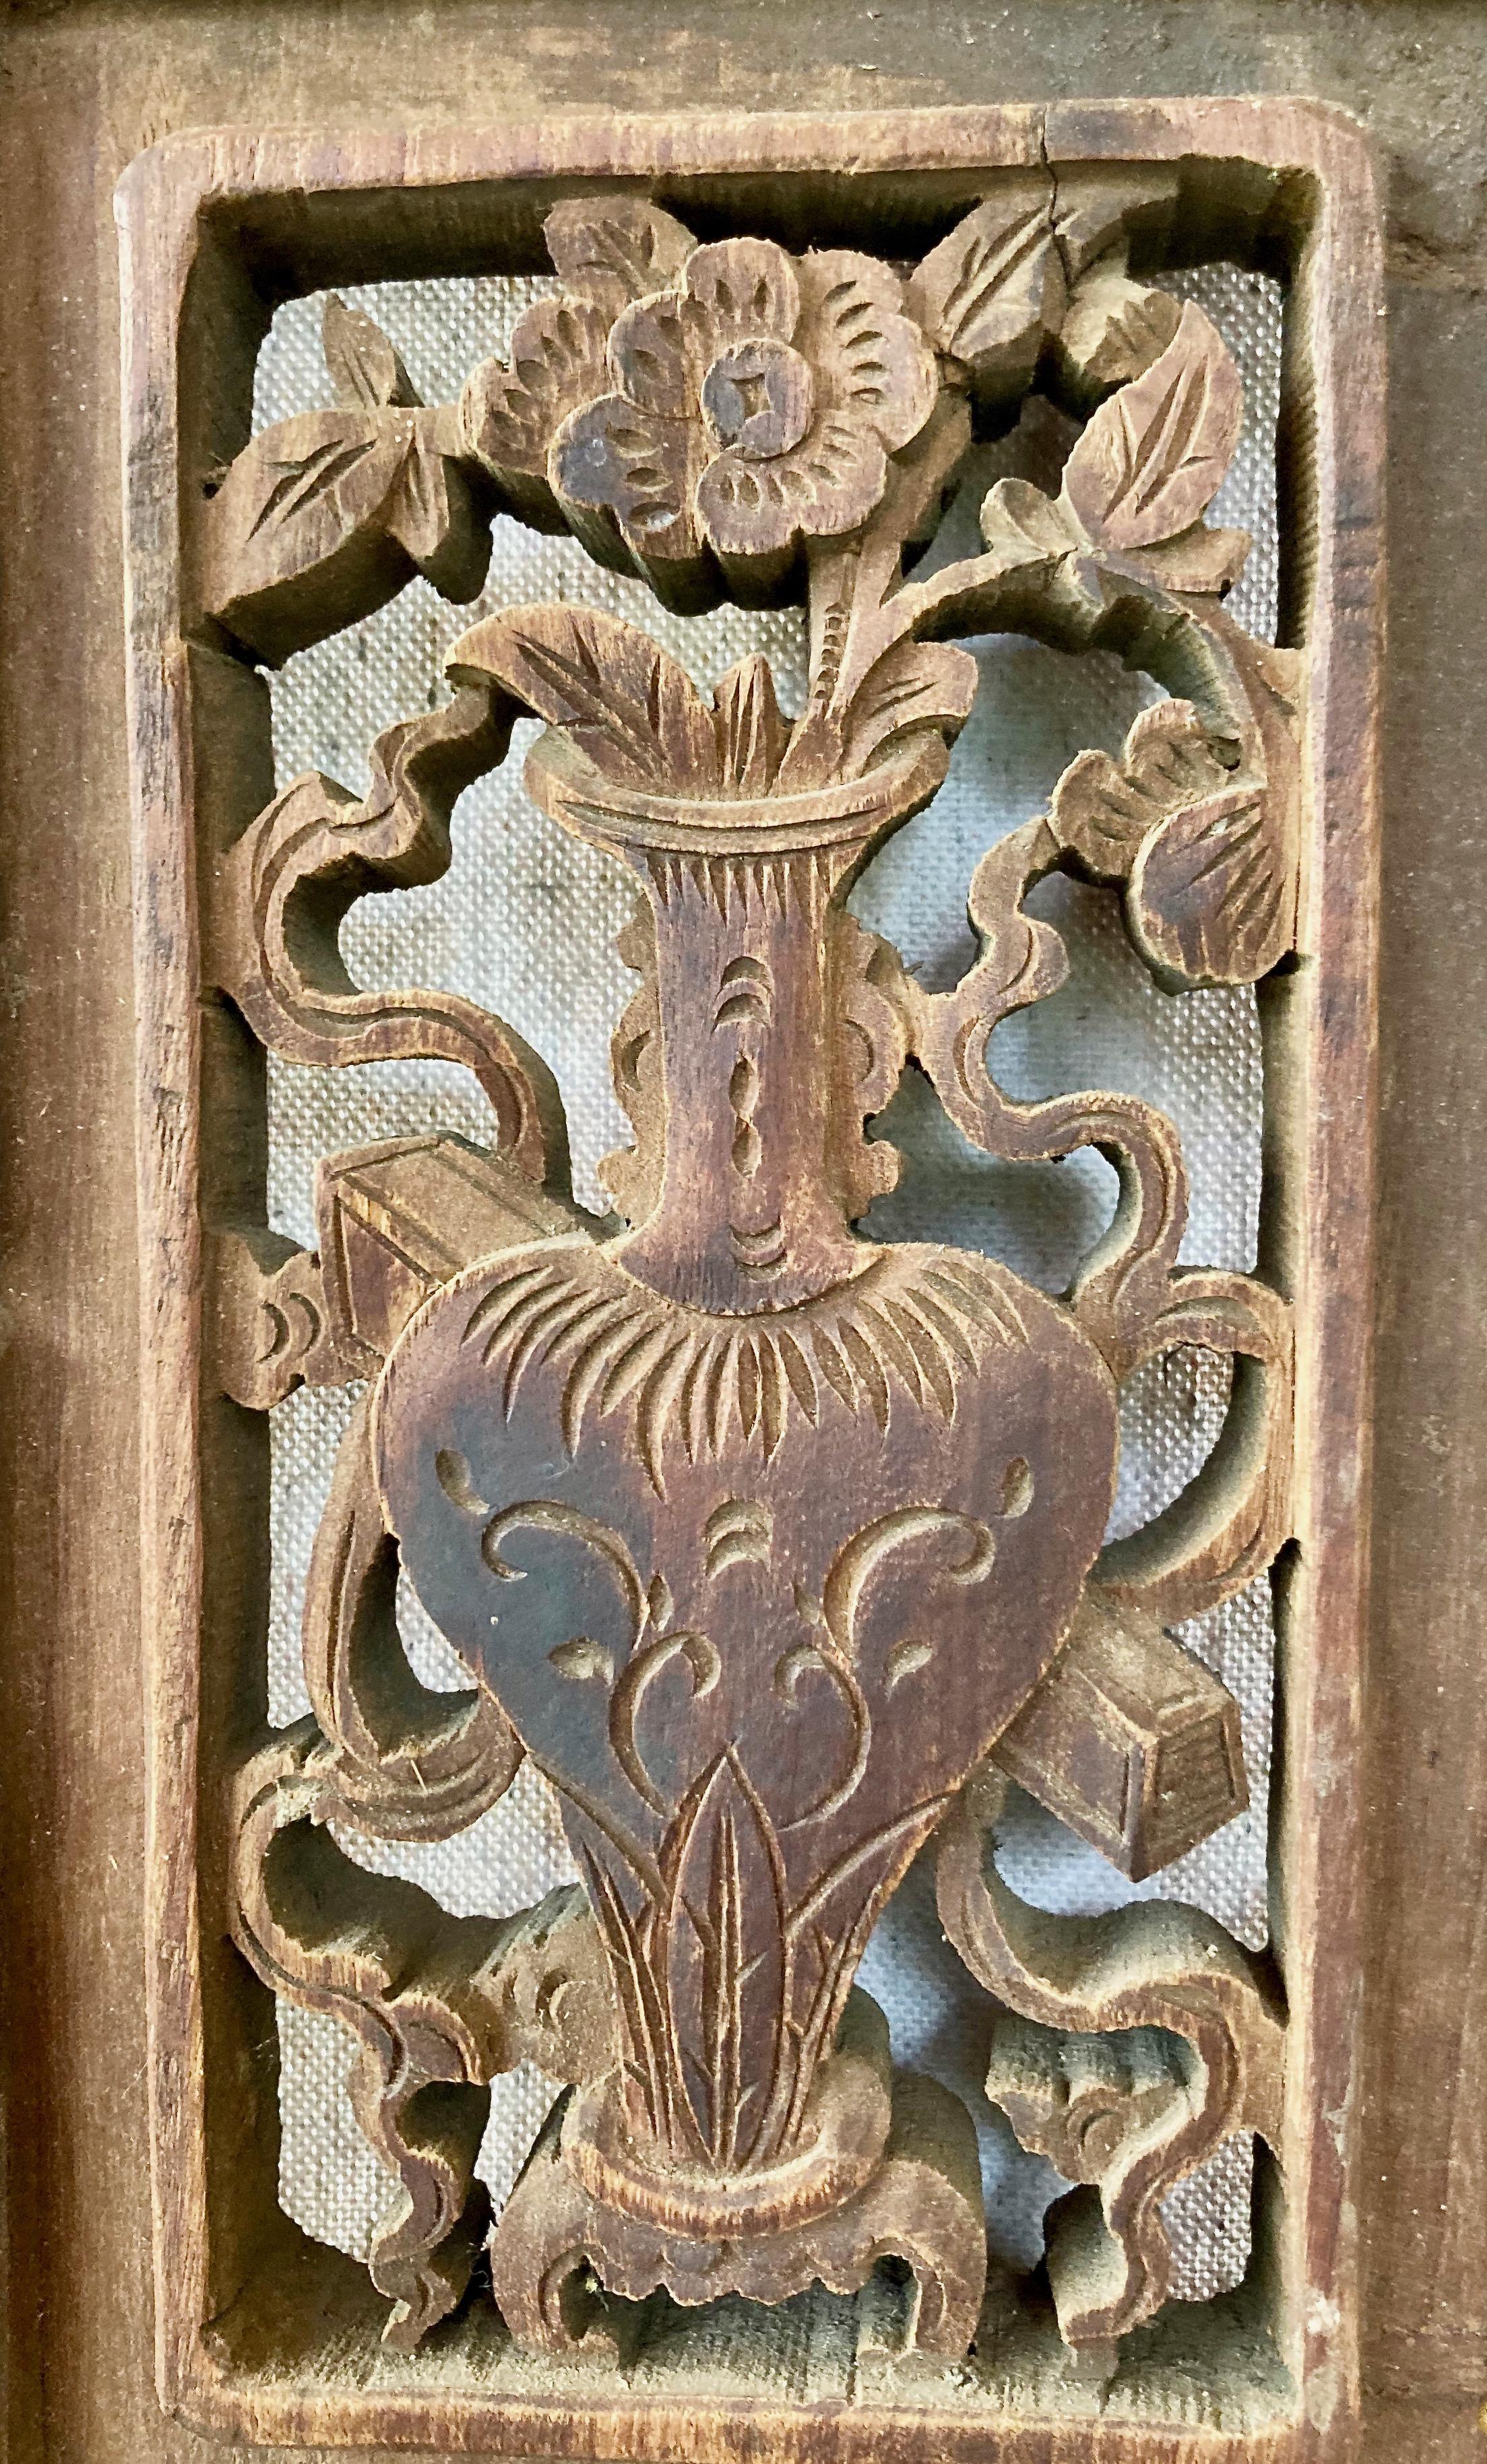 Thick framed three-pane panel includes openwork and relief carvings, and a rectangular center carving with vase/floral motif. Lower relief carved pane has bird motif.